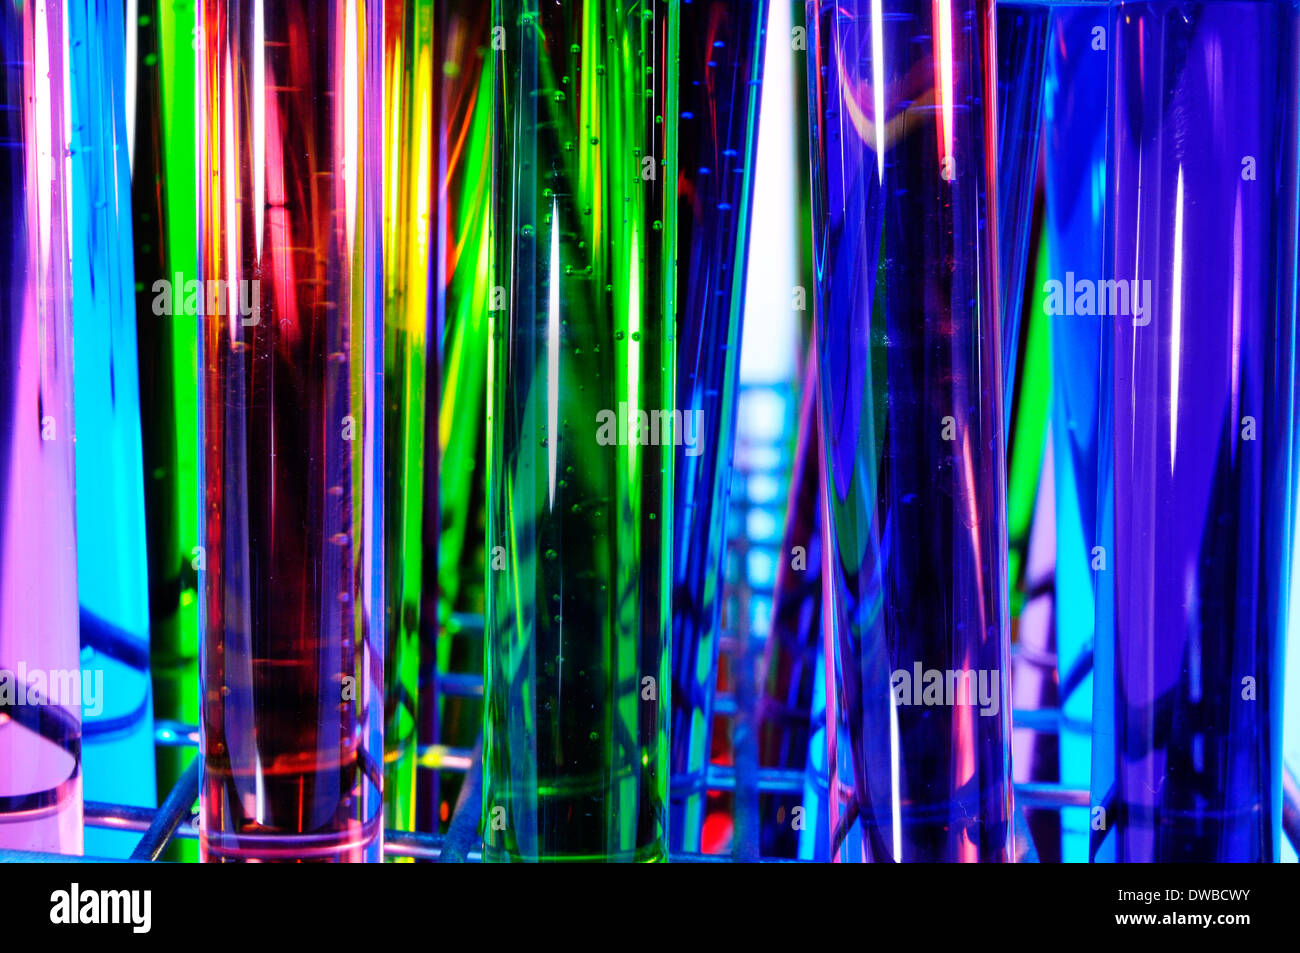 closeup of a pile of test tubes with liquids of different colors Stock Photo